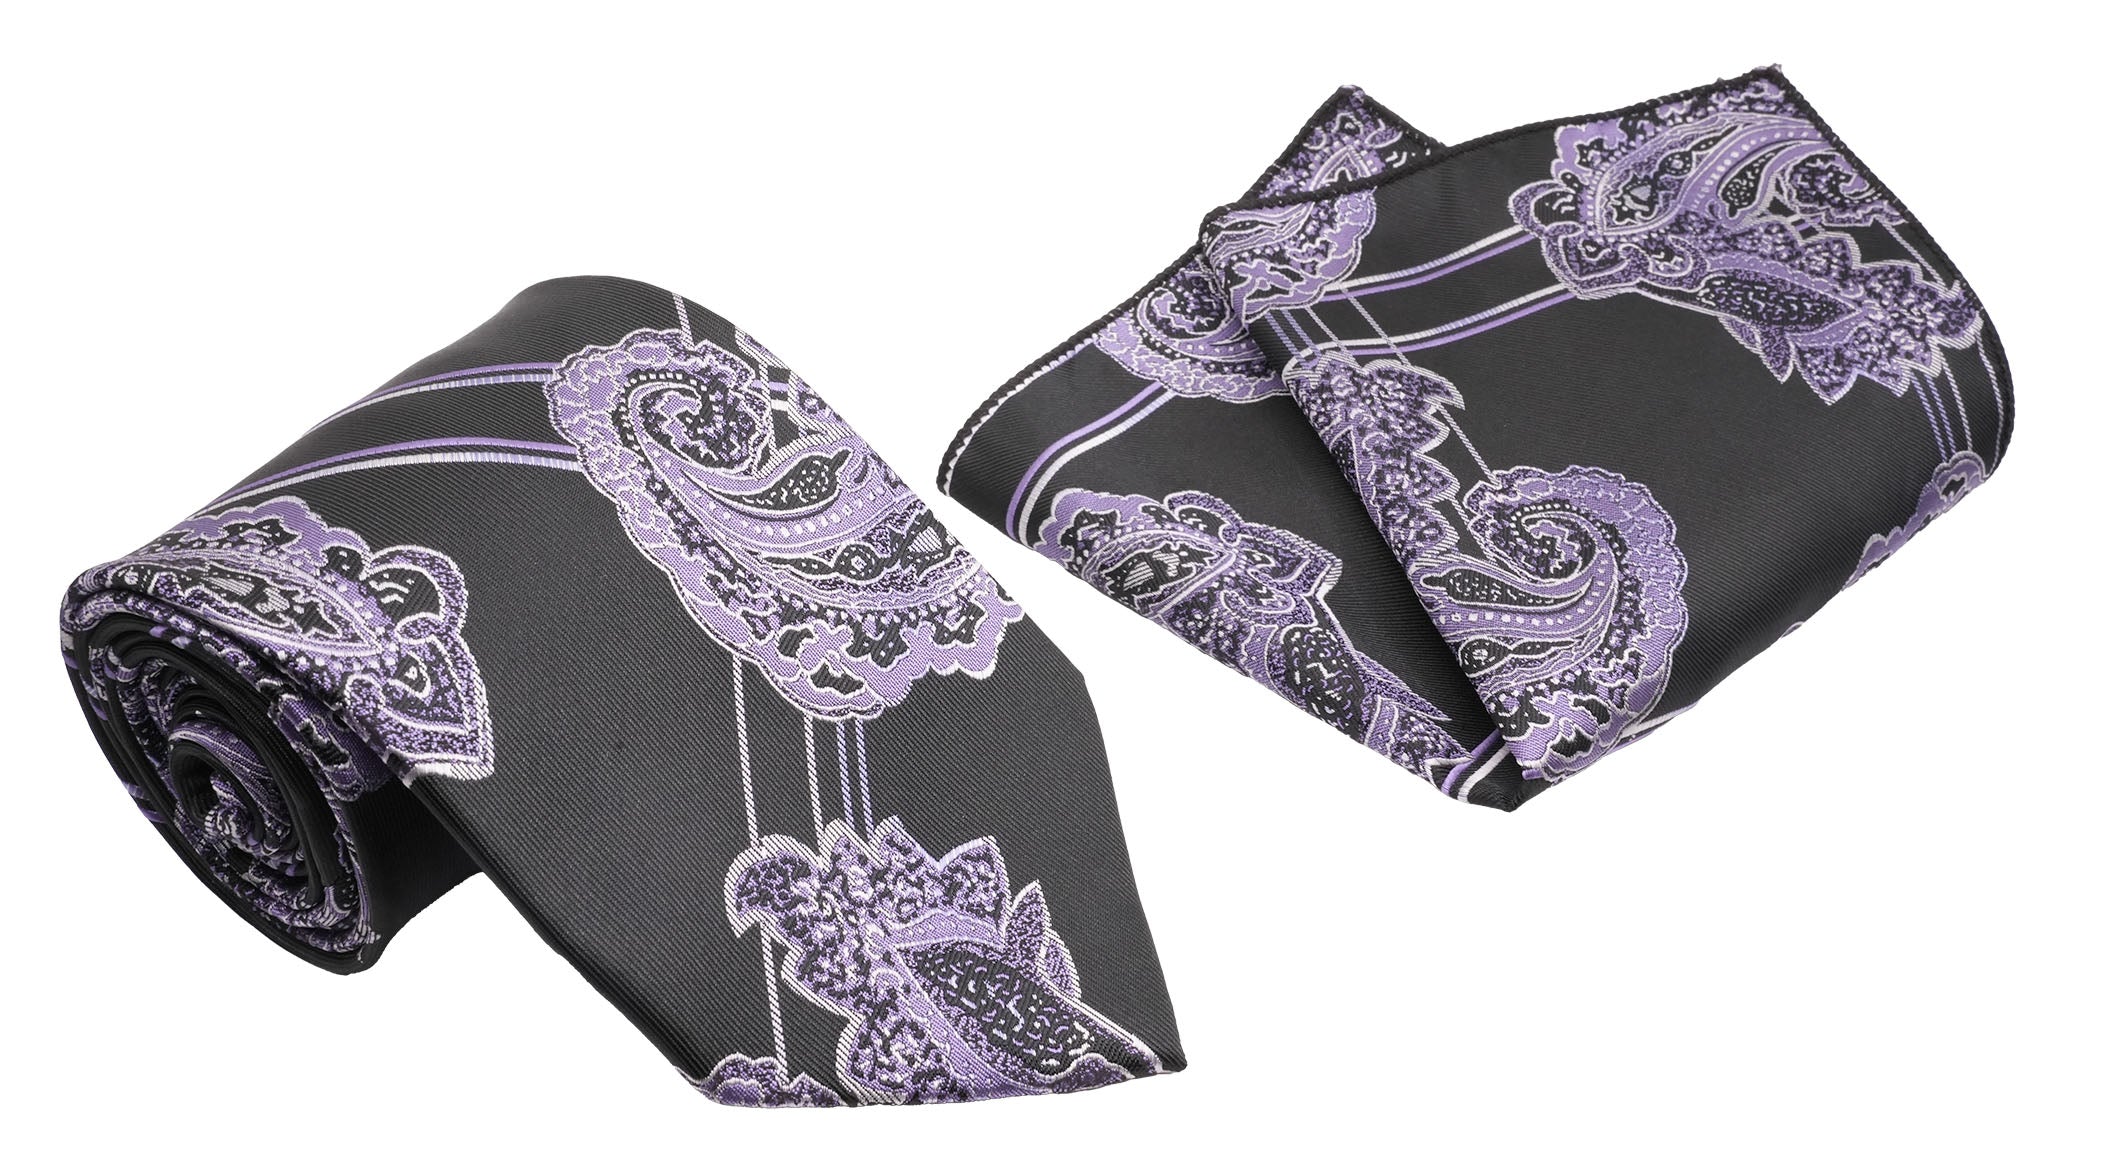 Black and Violet Paisley Pattern Men's Classic Tie and Pocket Square Set